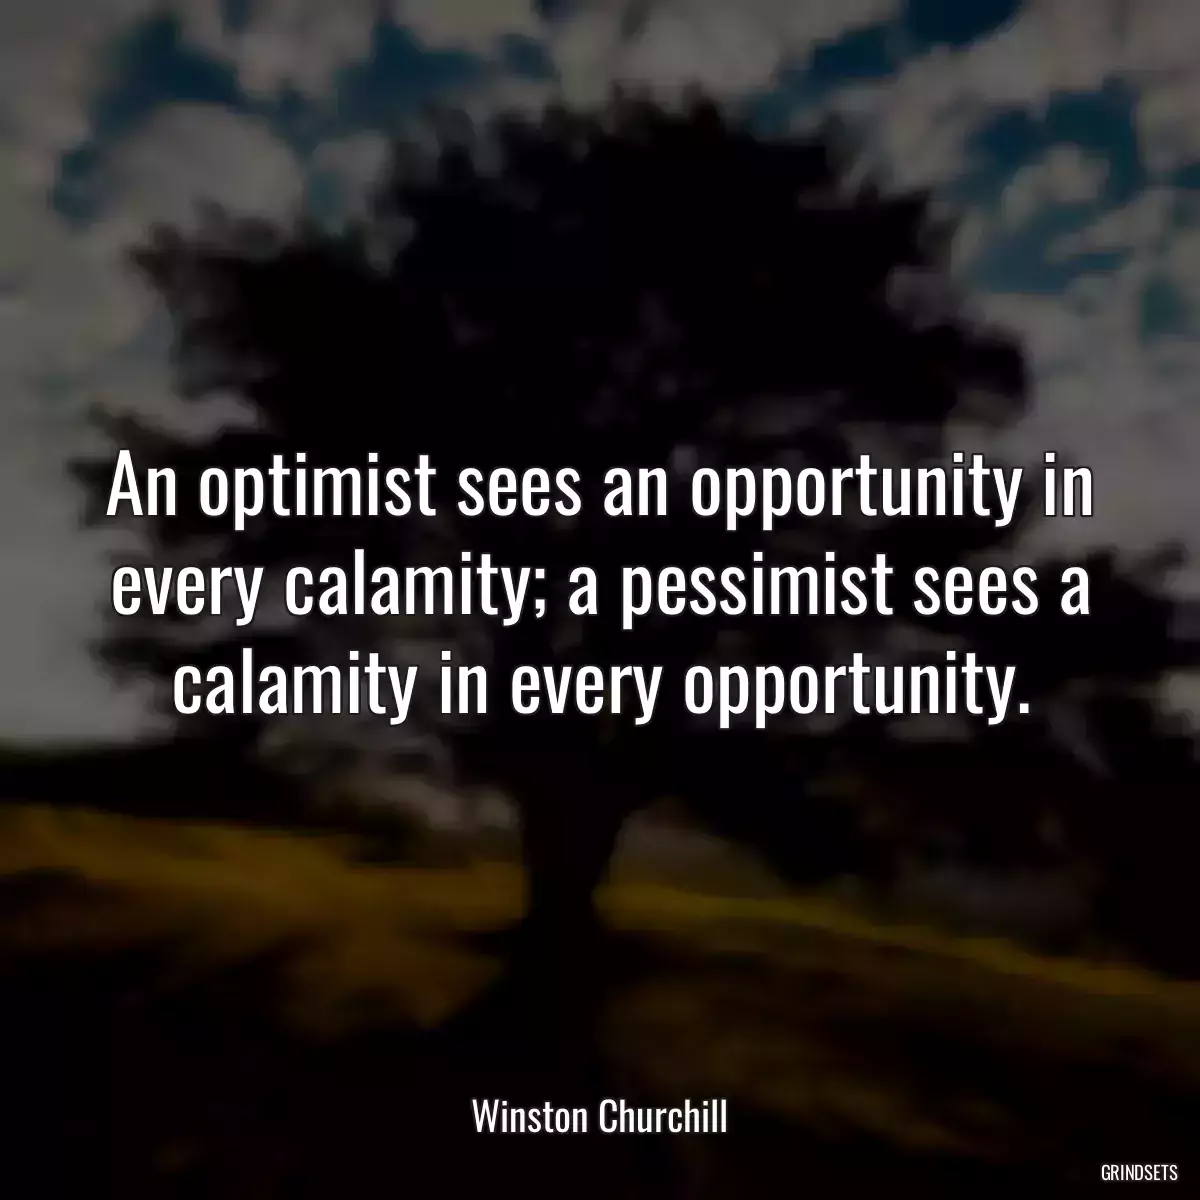 An optimist sees an opportunity in every calamity; a pessimist sees a calamity in every opportunity.